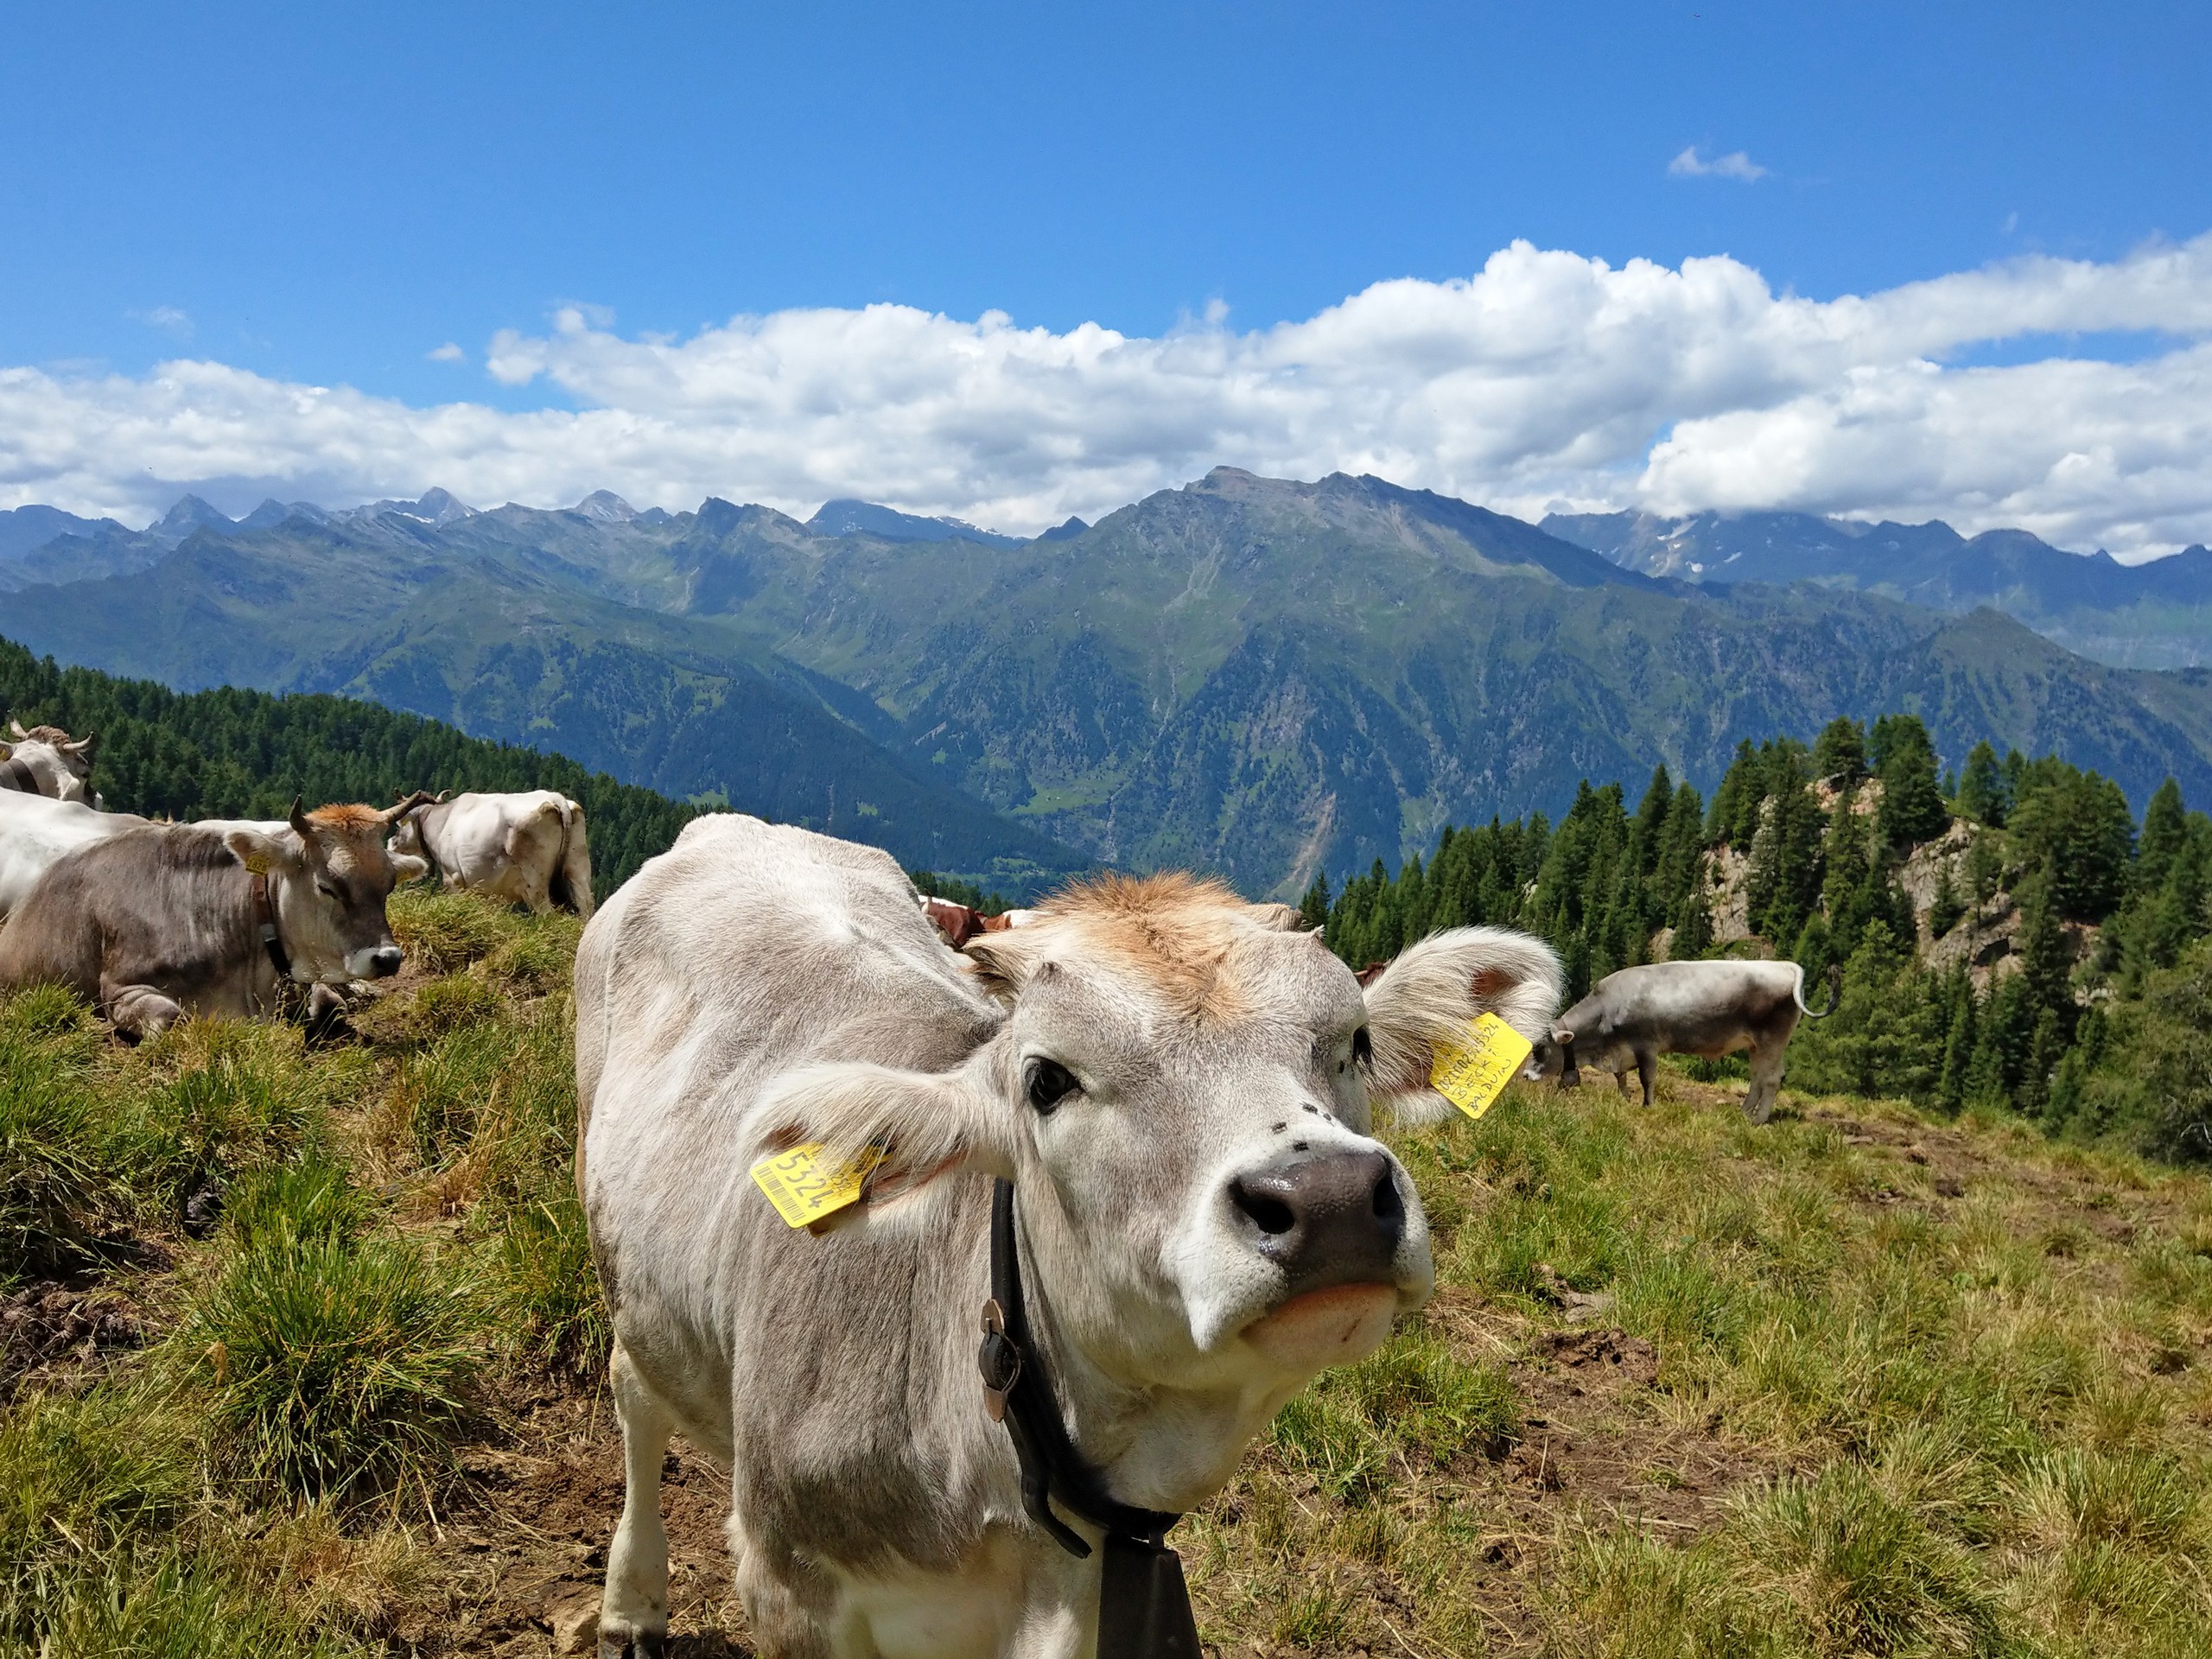 Friendly cow met while hiking in the alps